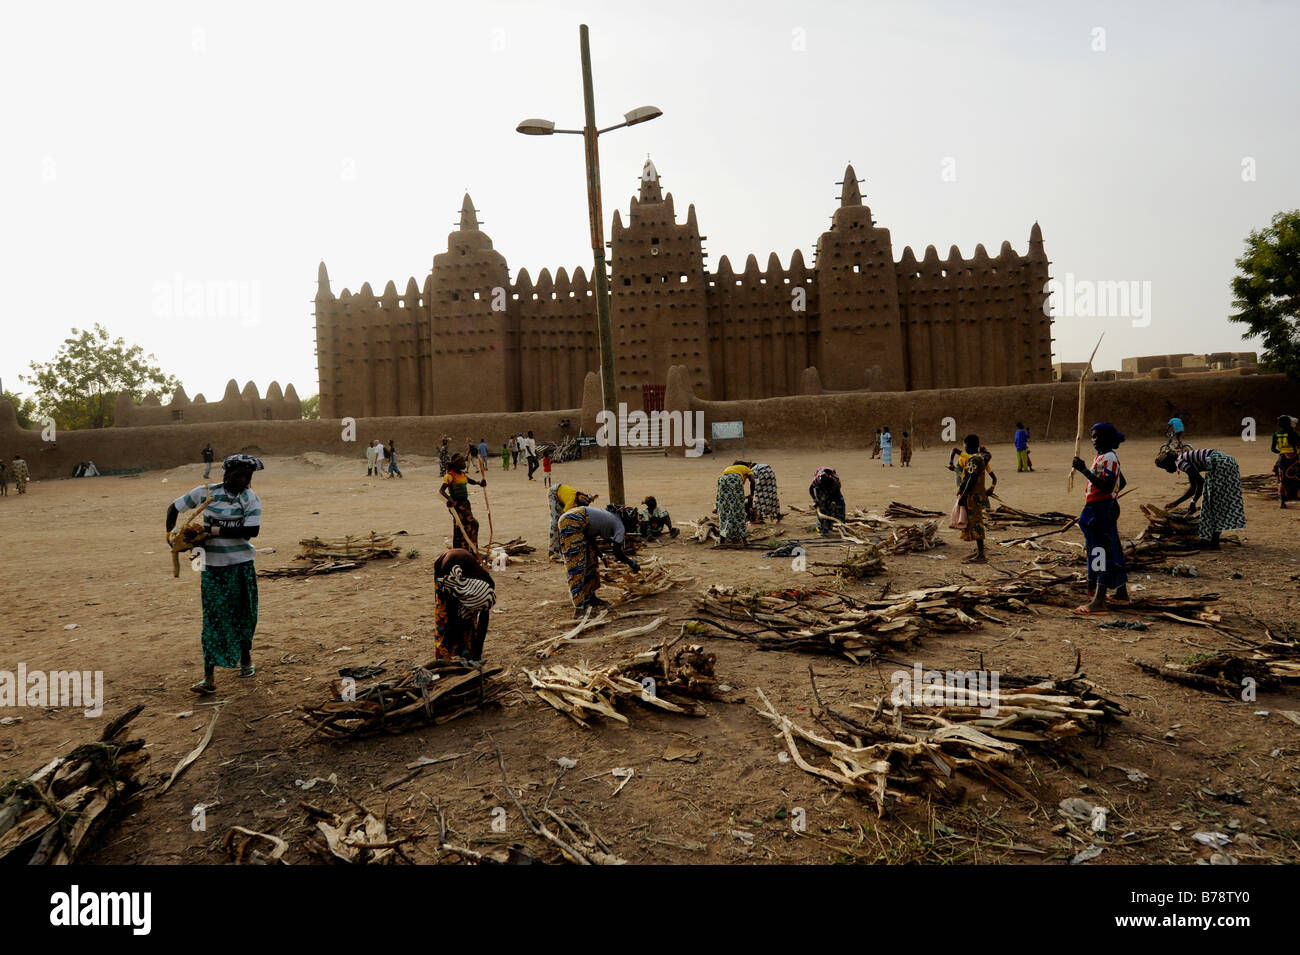 women arranging firewood in front largest mud brick or adobe building in the world, the Great Mosque of Djenné in Mali Stock Photo